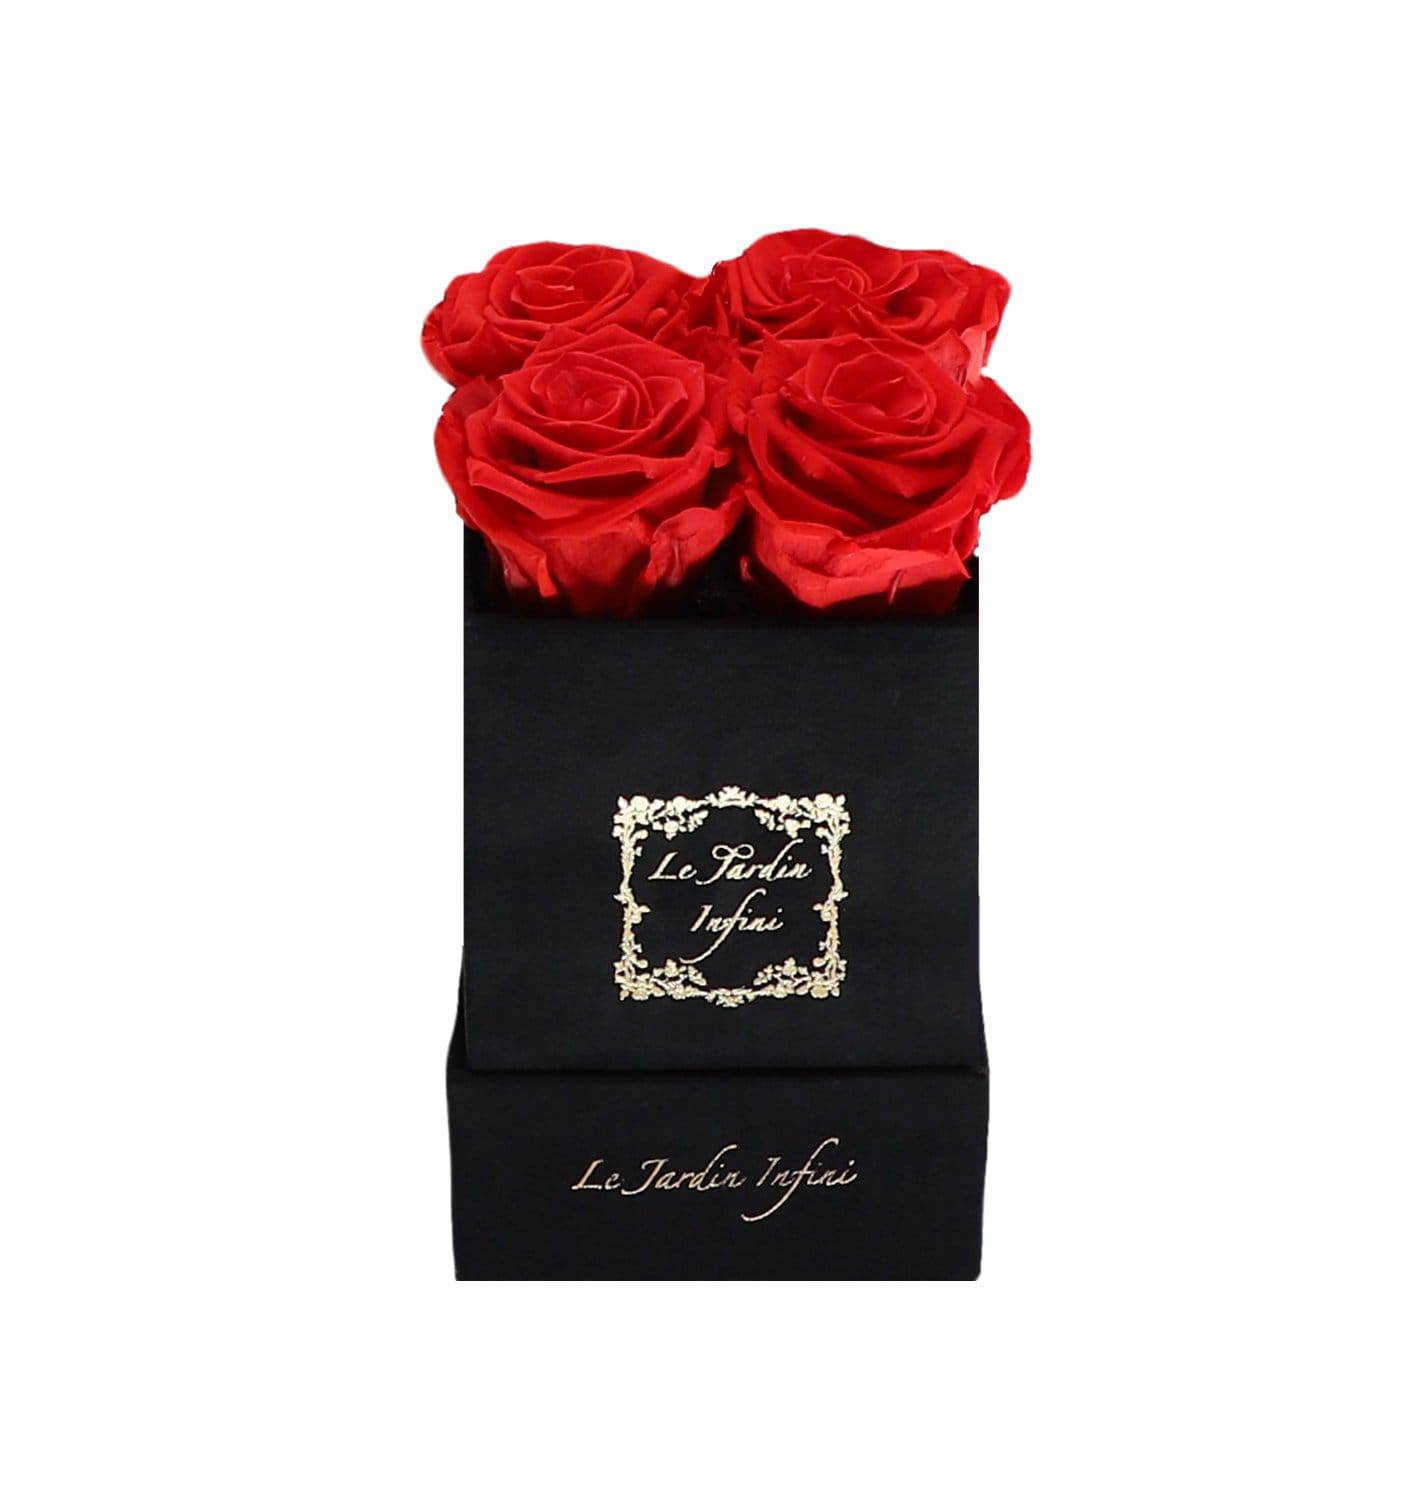 Red Preserved Roses - Small Square Black Suede Box - Le Jardin Infini Roses in a Box